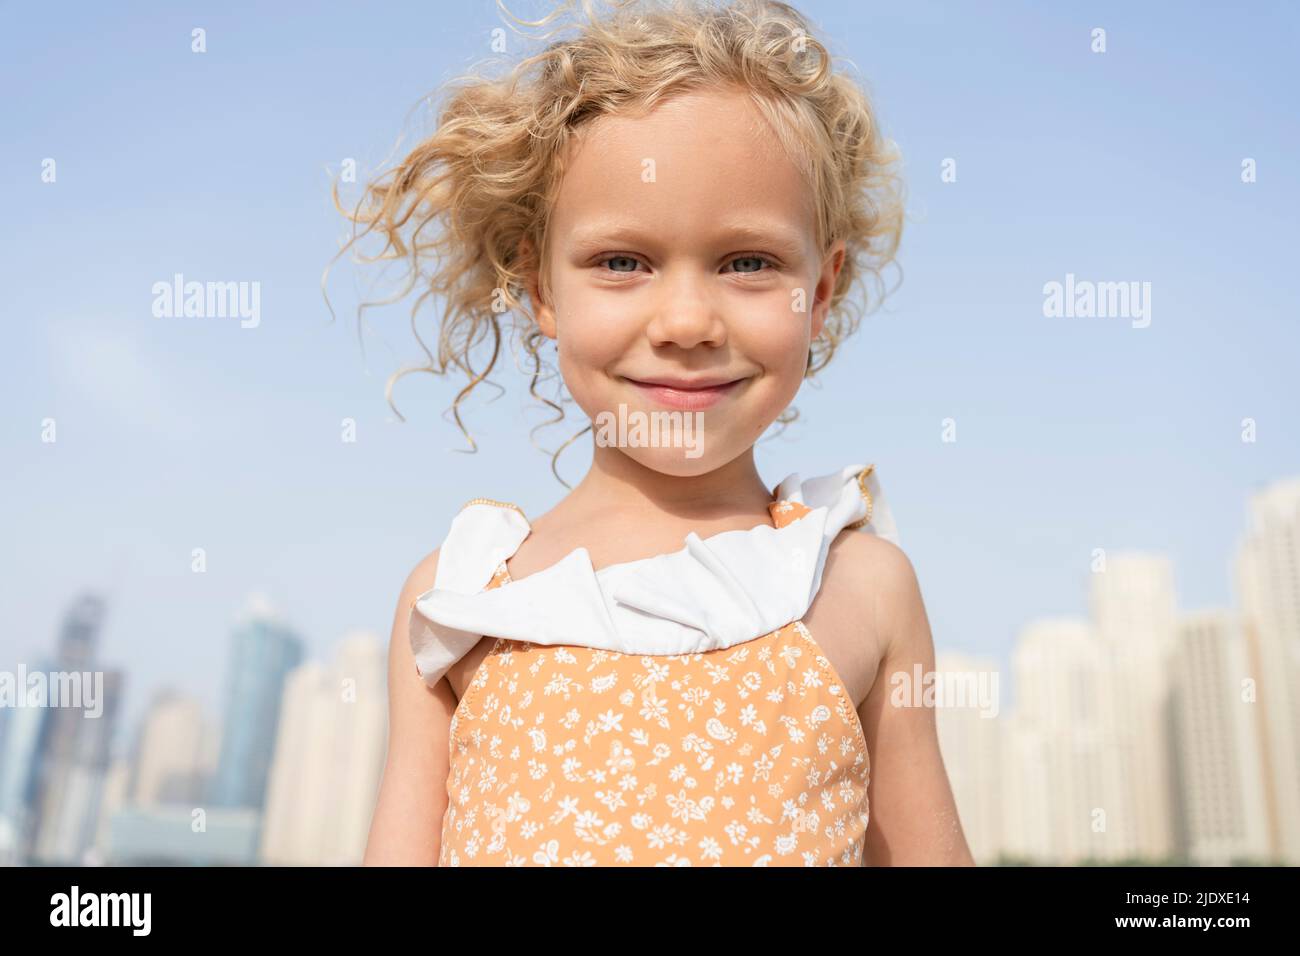 Happy girl with blond hair on sunny day Stock Photo